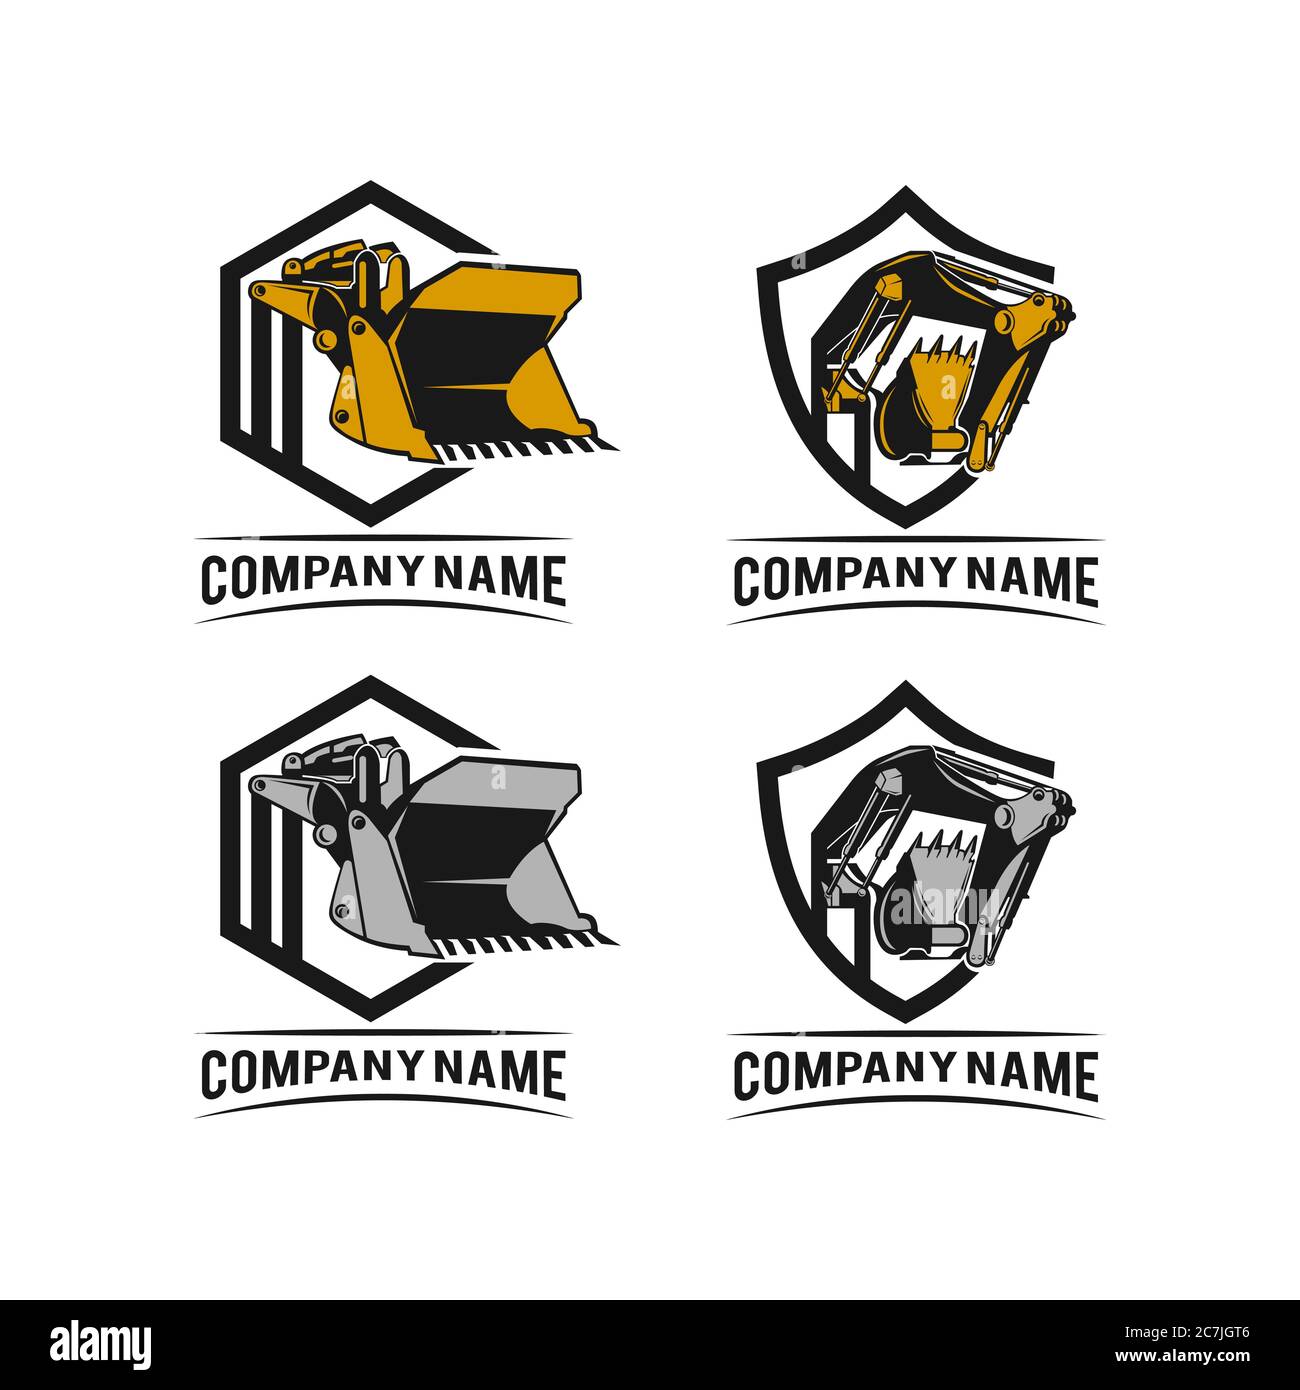 Excavator design in modern flat style isolated on white background. sign/symbols for heavy equipment,construction,industrial etc. Excavator symbol for Stock Vector